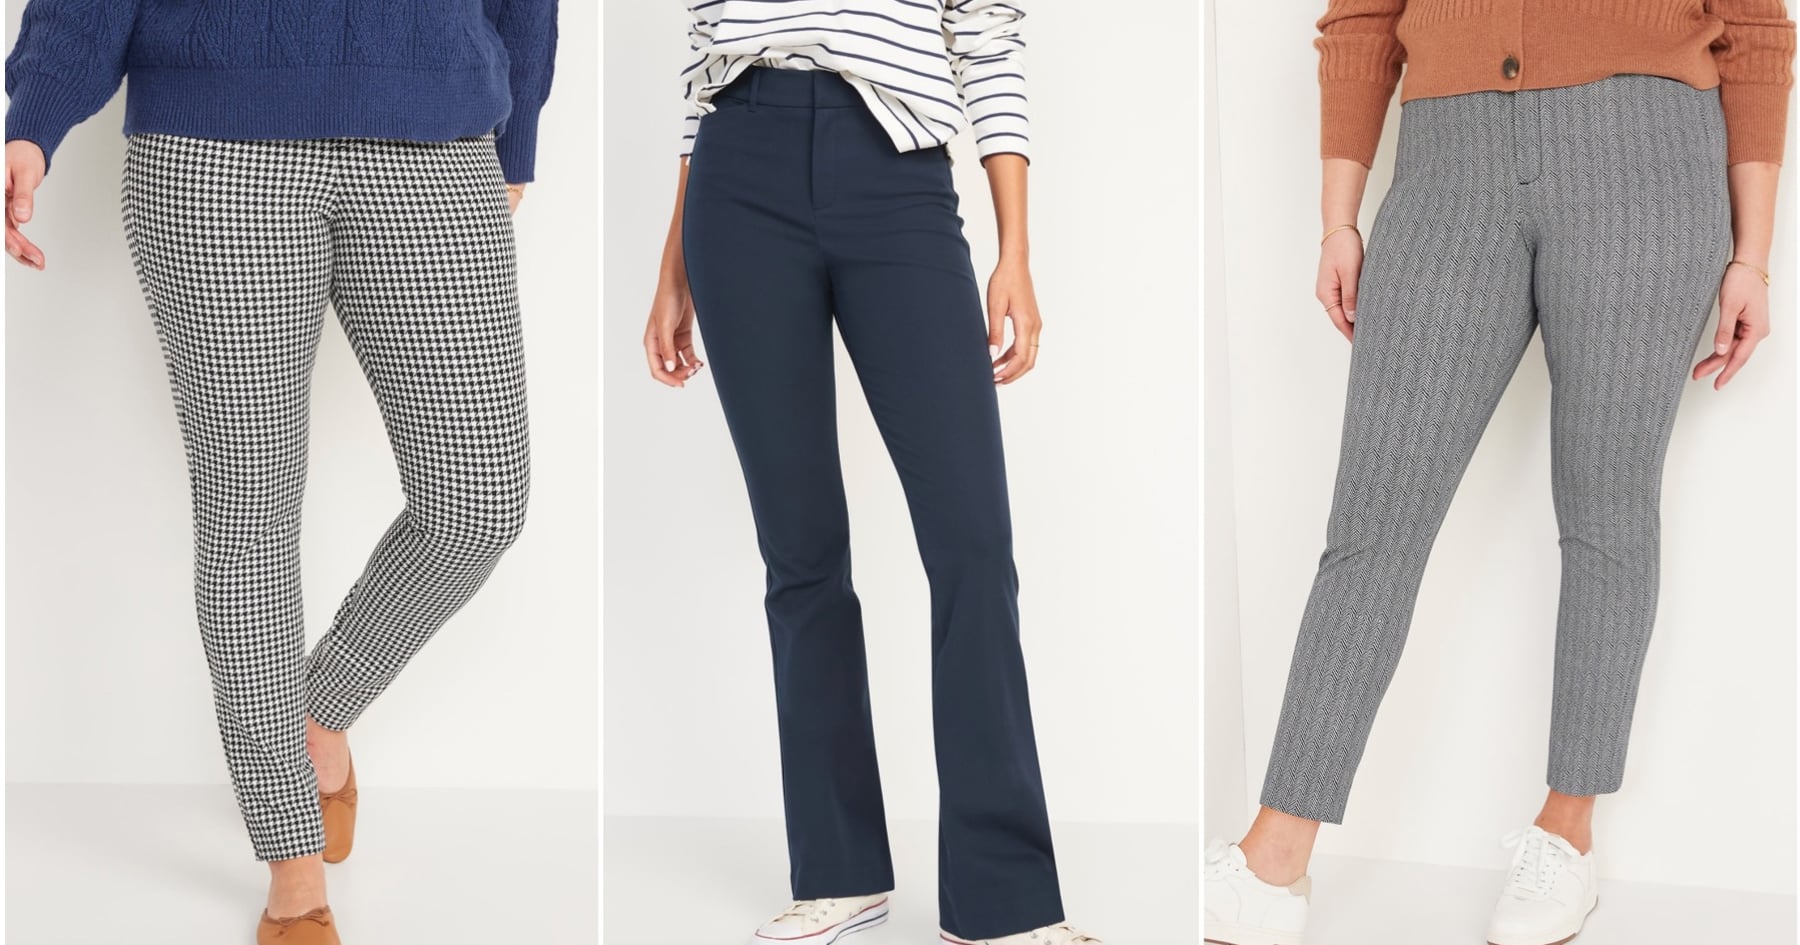 Old Navy High-Waisted Pixie Ankle Pants for Women  Pants for women, Ankle  pants, Pixie pants outfit